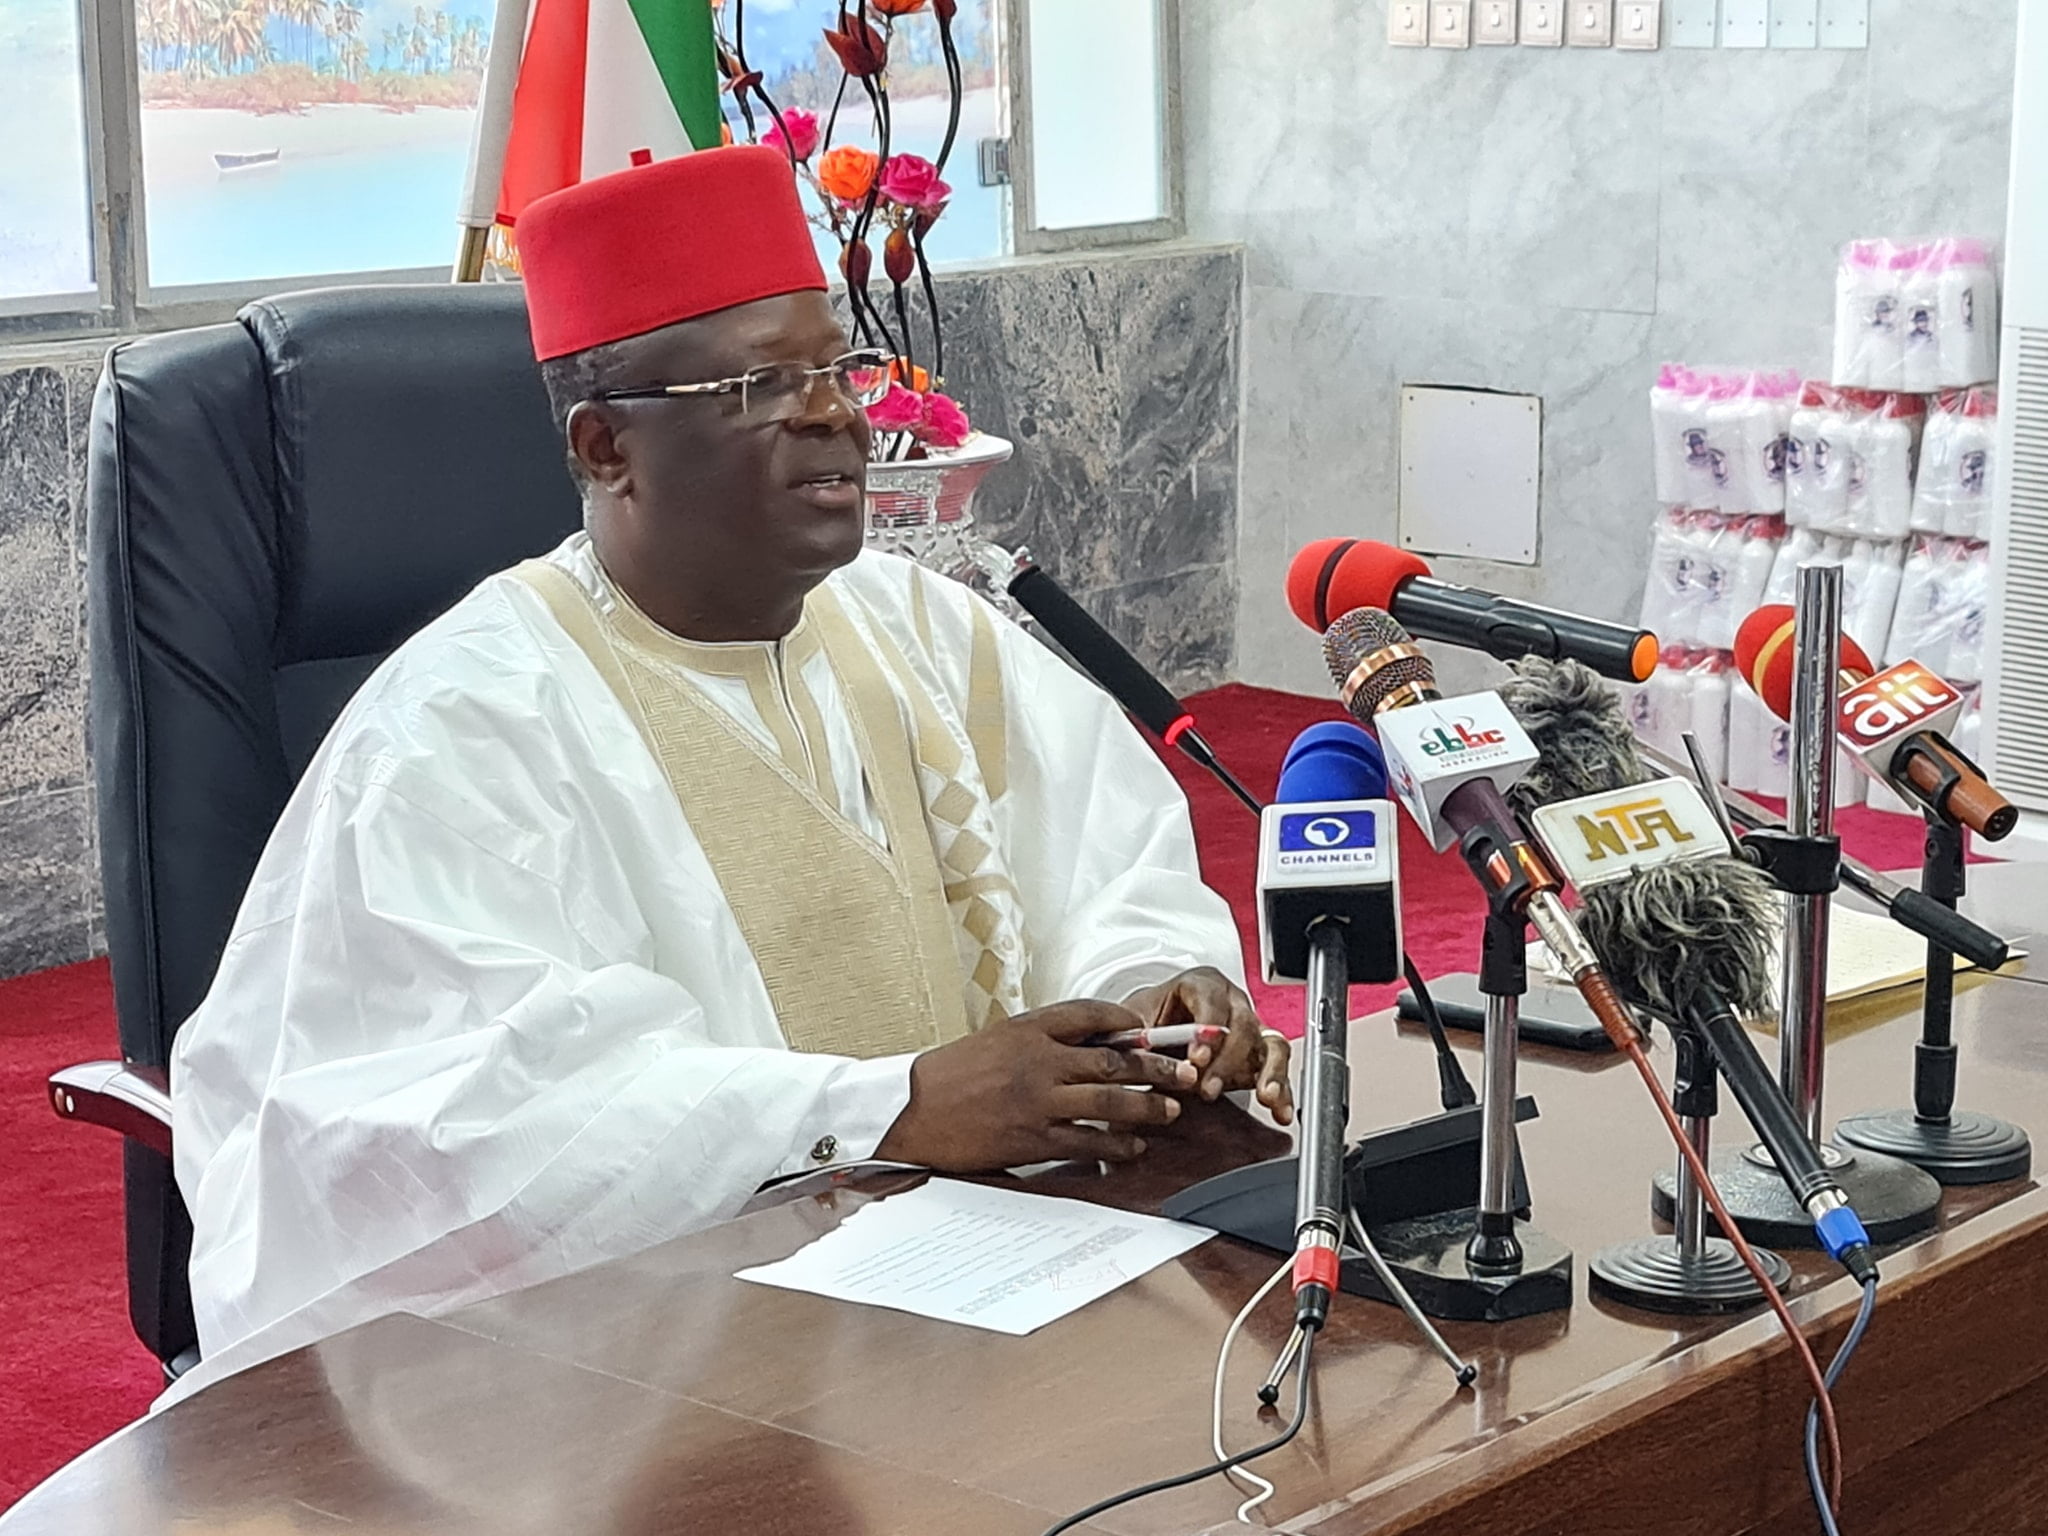 Abuja-Kaduna-Kano Expressway to be completed within 24 months - Minister Umahi